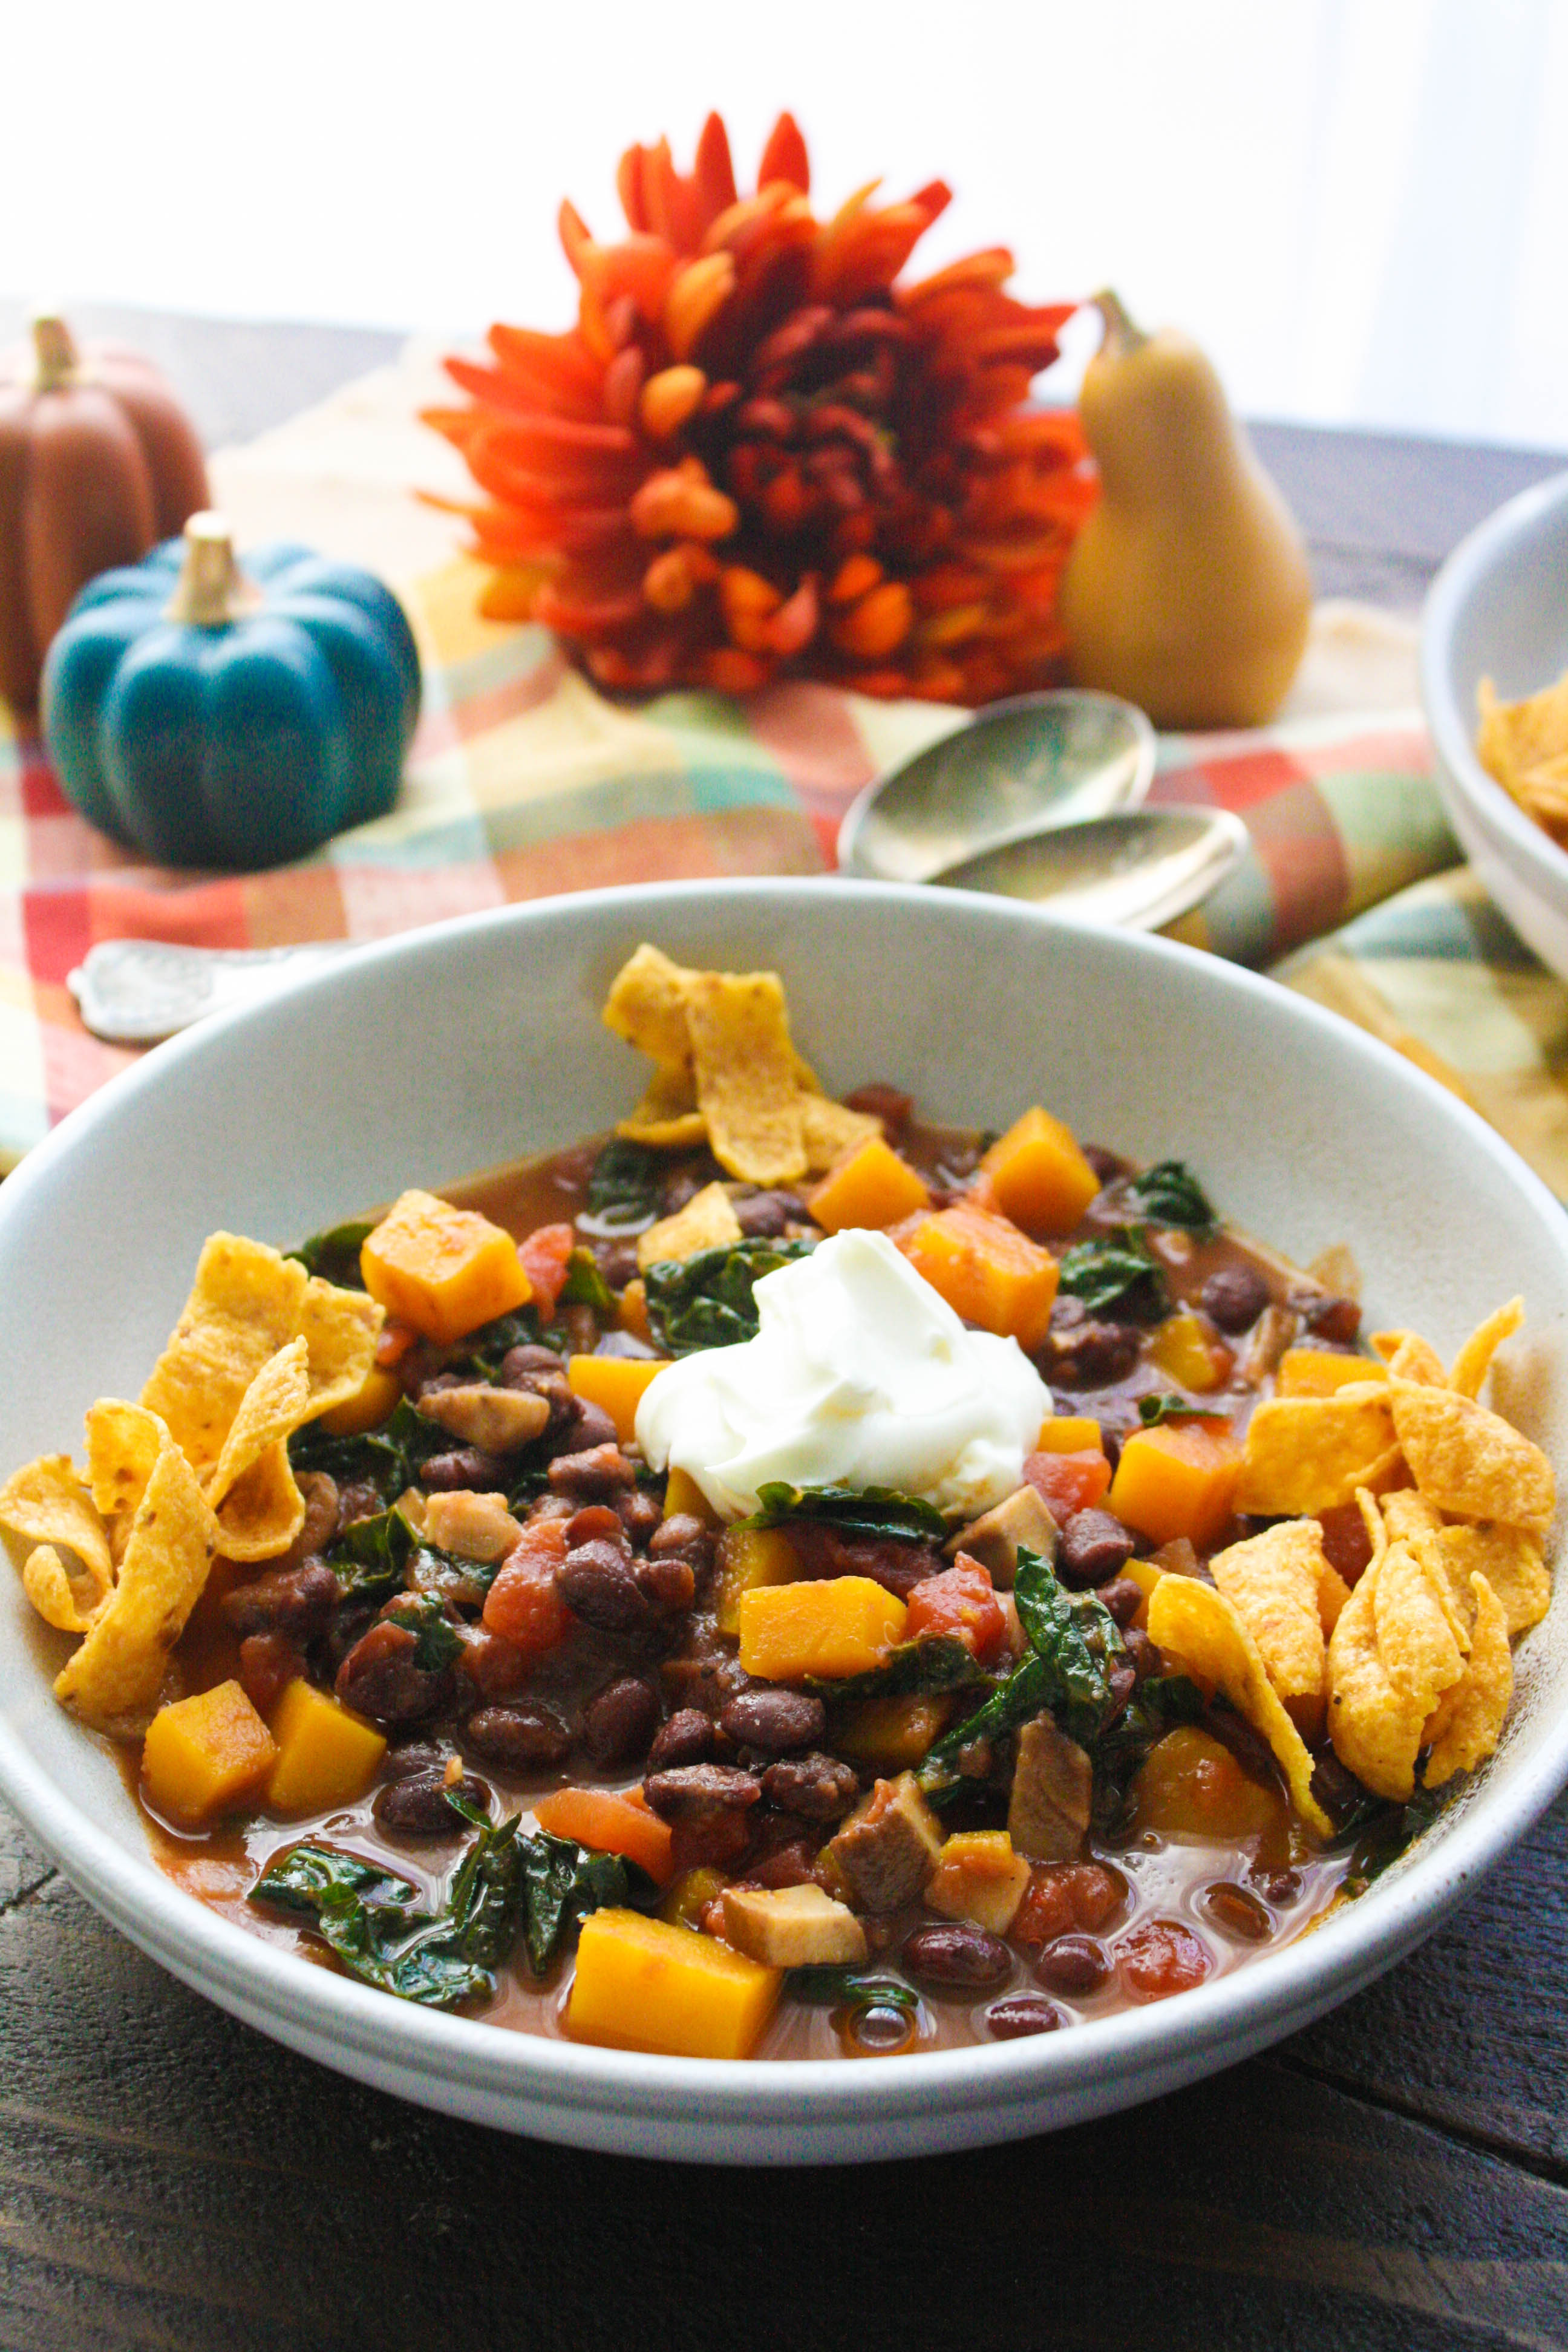 Butternut Squash and Black Bean Chili with Mushrooms & Kale is a fabulous, meatless chili. Butternut Squash and Black Bean Chili with Mushrooms & Kale is easy to make any night of the week.